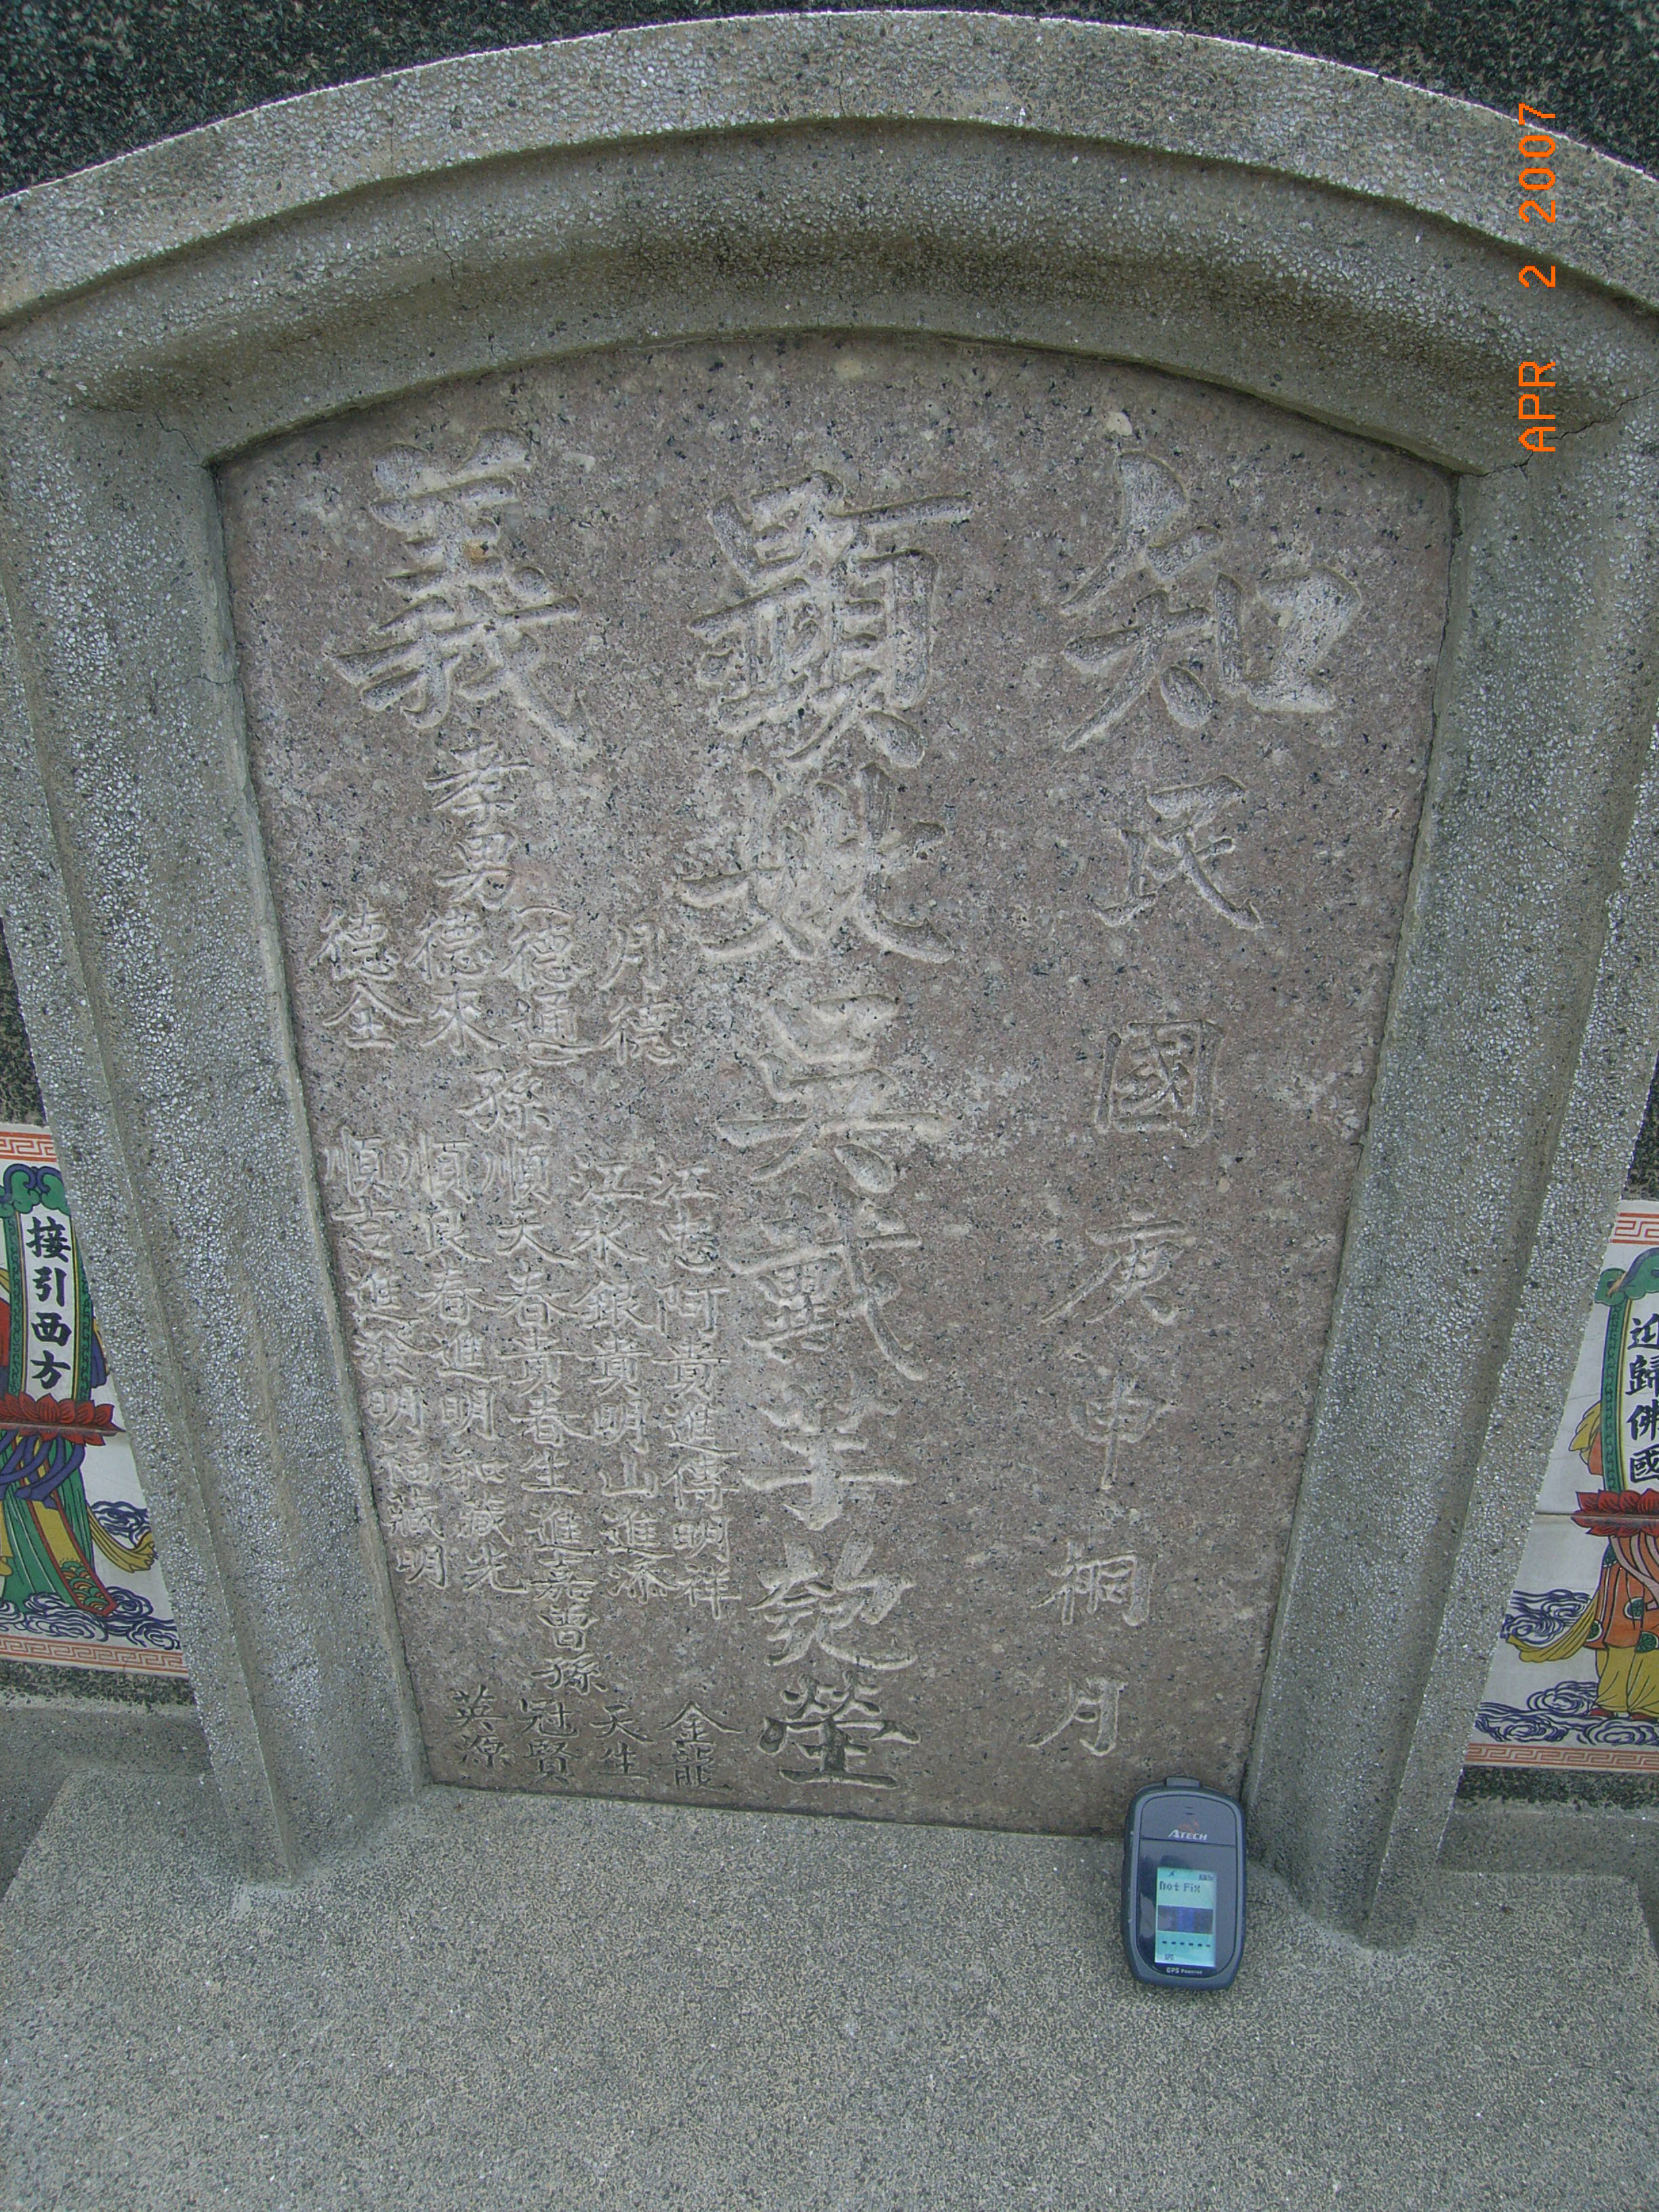 Tombstone of 吳 (WU2) family at Taiwan, Tainanxian, Guirenxiang, Mamiaocun, private site. The tombstone-ID is 15036; 台灣，台南縣，關廟鄉，私有地，吳姓之墓碑。